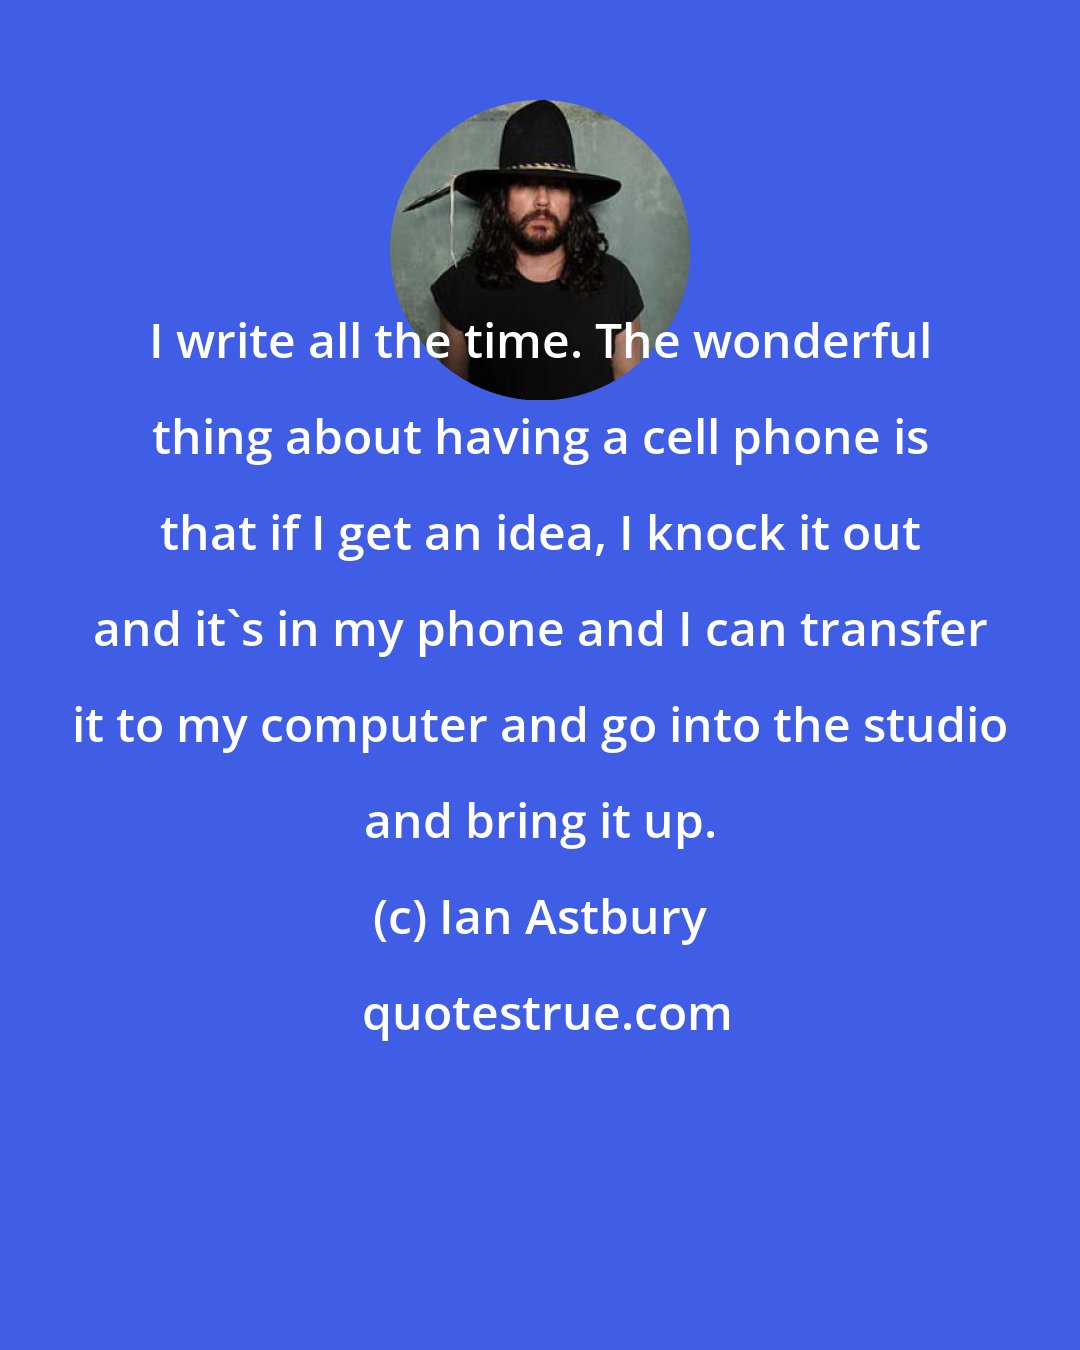 Ian Astbury: I write all the time. The wonderful thing about having a cell phone is that if I get an idea, I knock it out and it's in my phone and I can transfer it to my computer and go into the studio and bring it up.